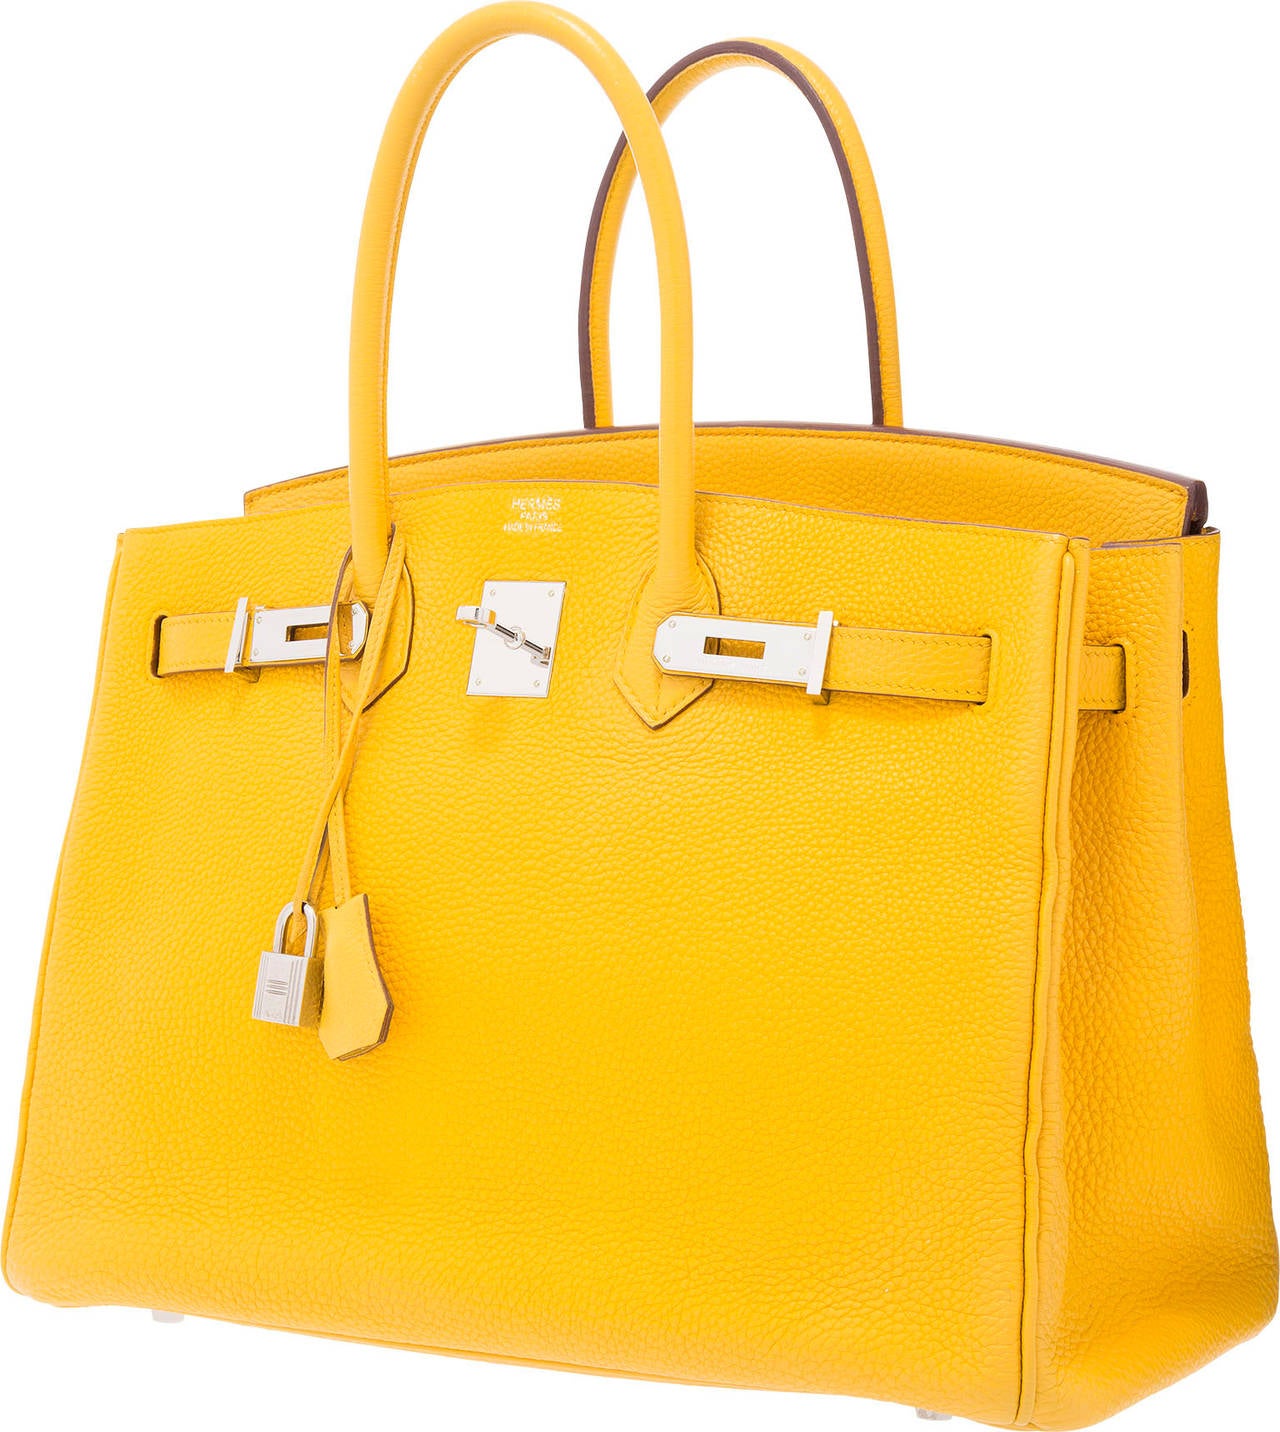 This Birkin is quite the standout. The Hermes Birkin bag has become one of the most desired luxury status symbols. The Birkin is cherished for its functional design and lasting value. This particular Birkin is done in a bright Soleil and accented